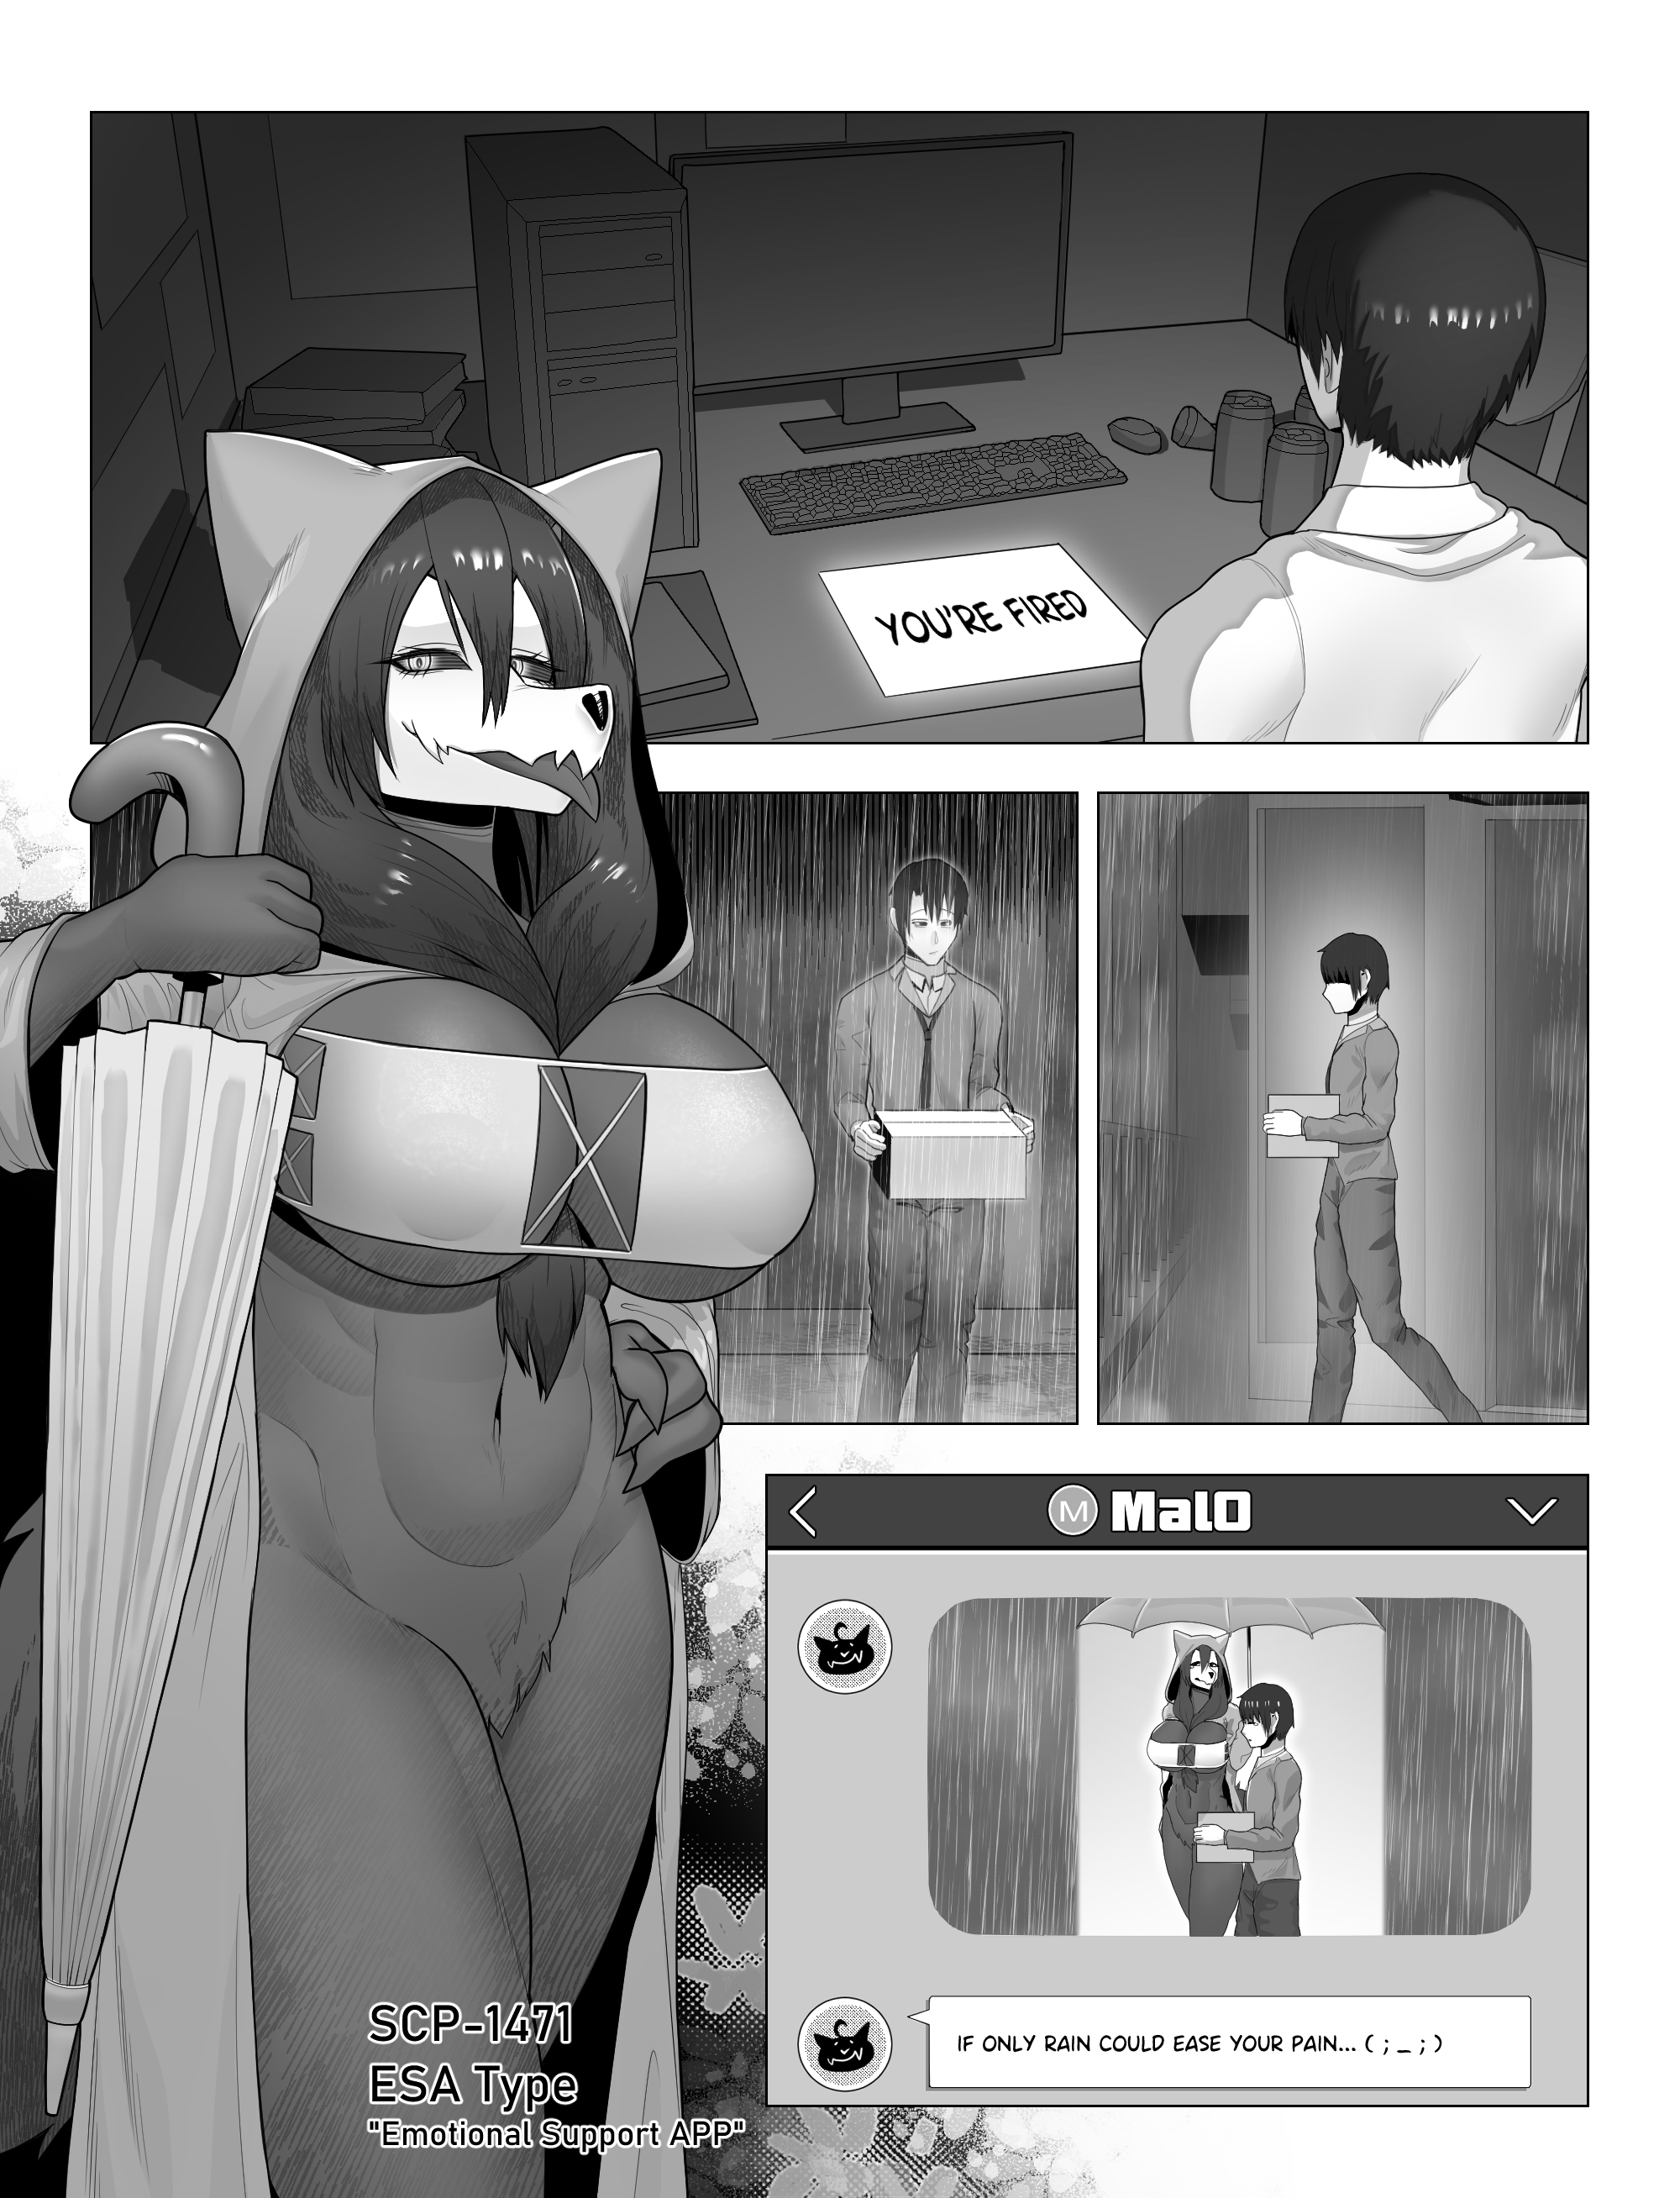 Re-Comic] SCP-1471-07 by vavacung on DeviantArt